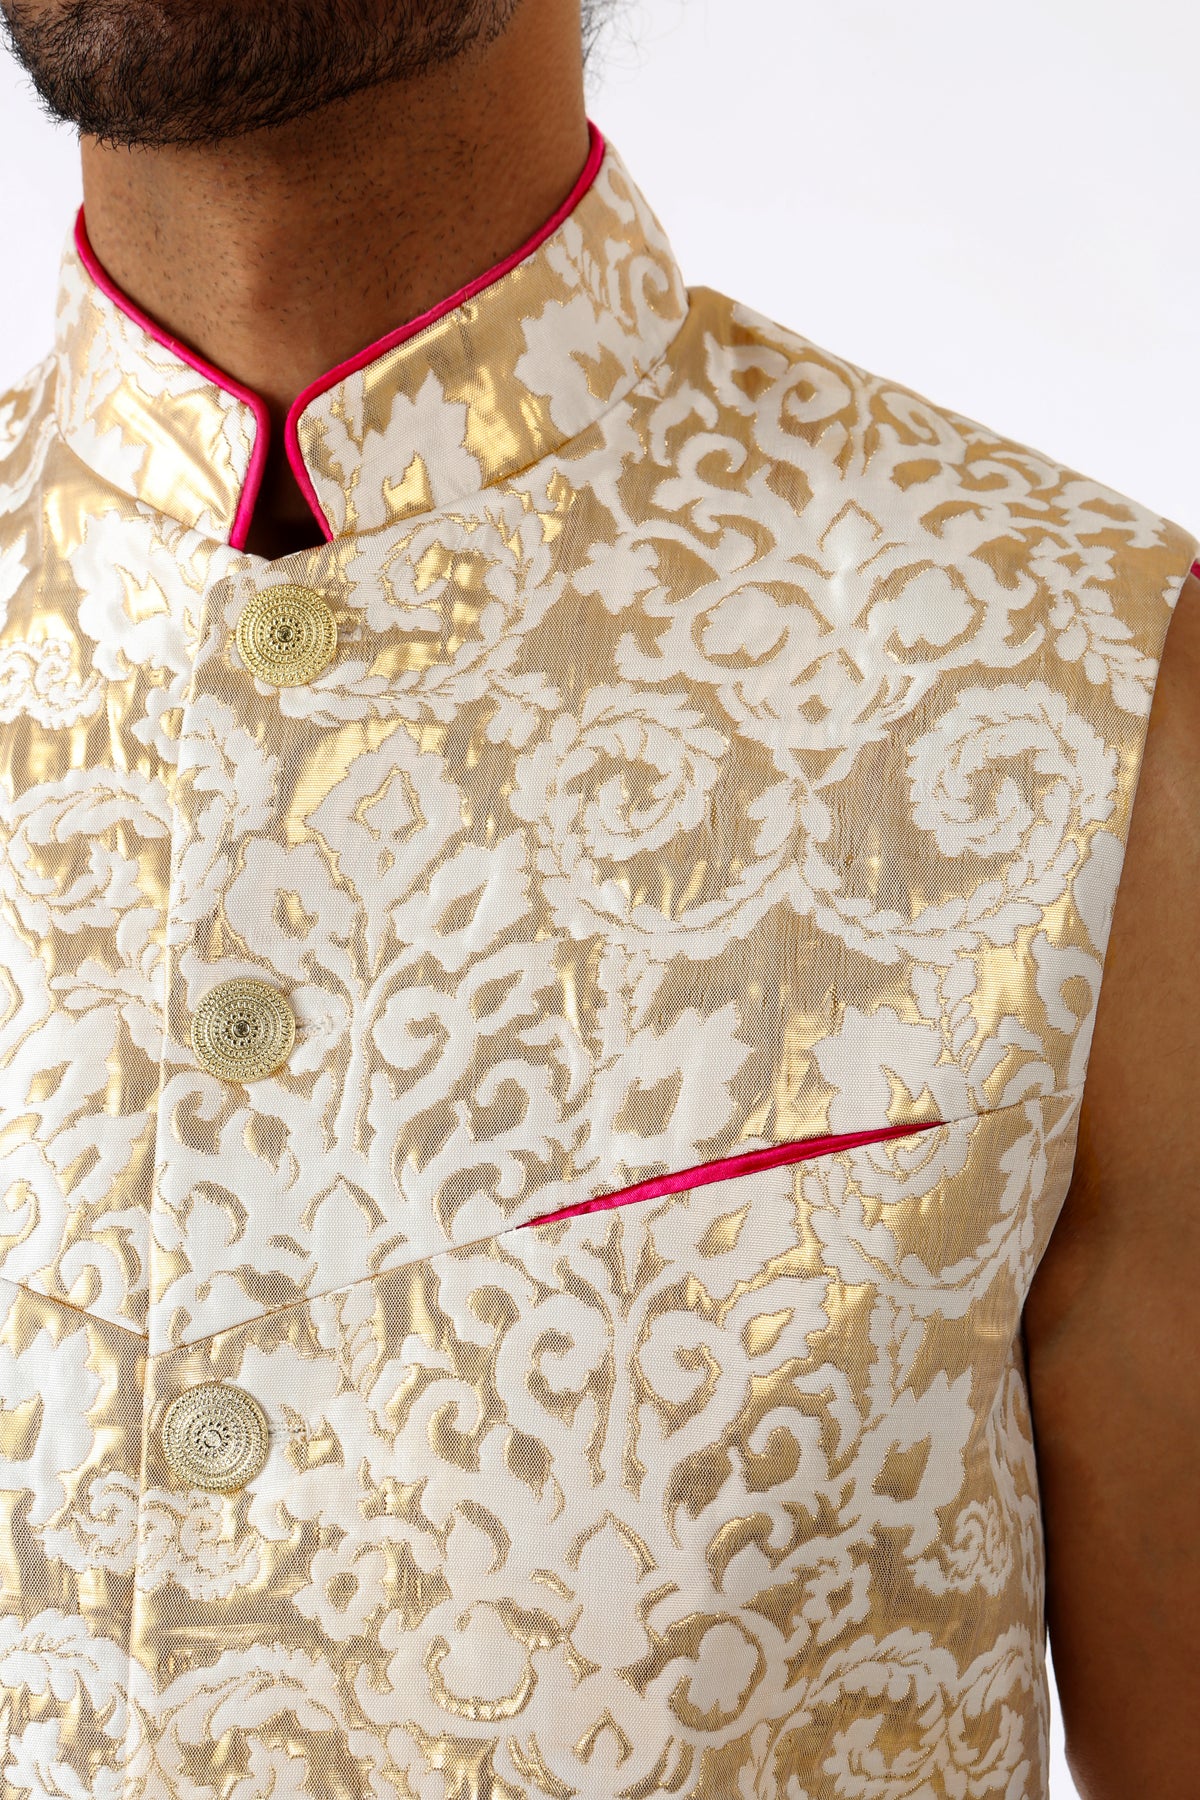 Harleen Kaur ARJUN Gold Vest with Gold Buttons and Pink Piped Mandarin Collar - Front Chest Pocket Detail View